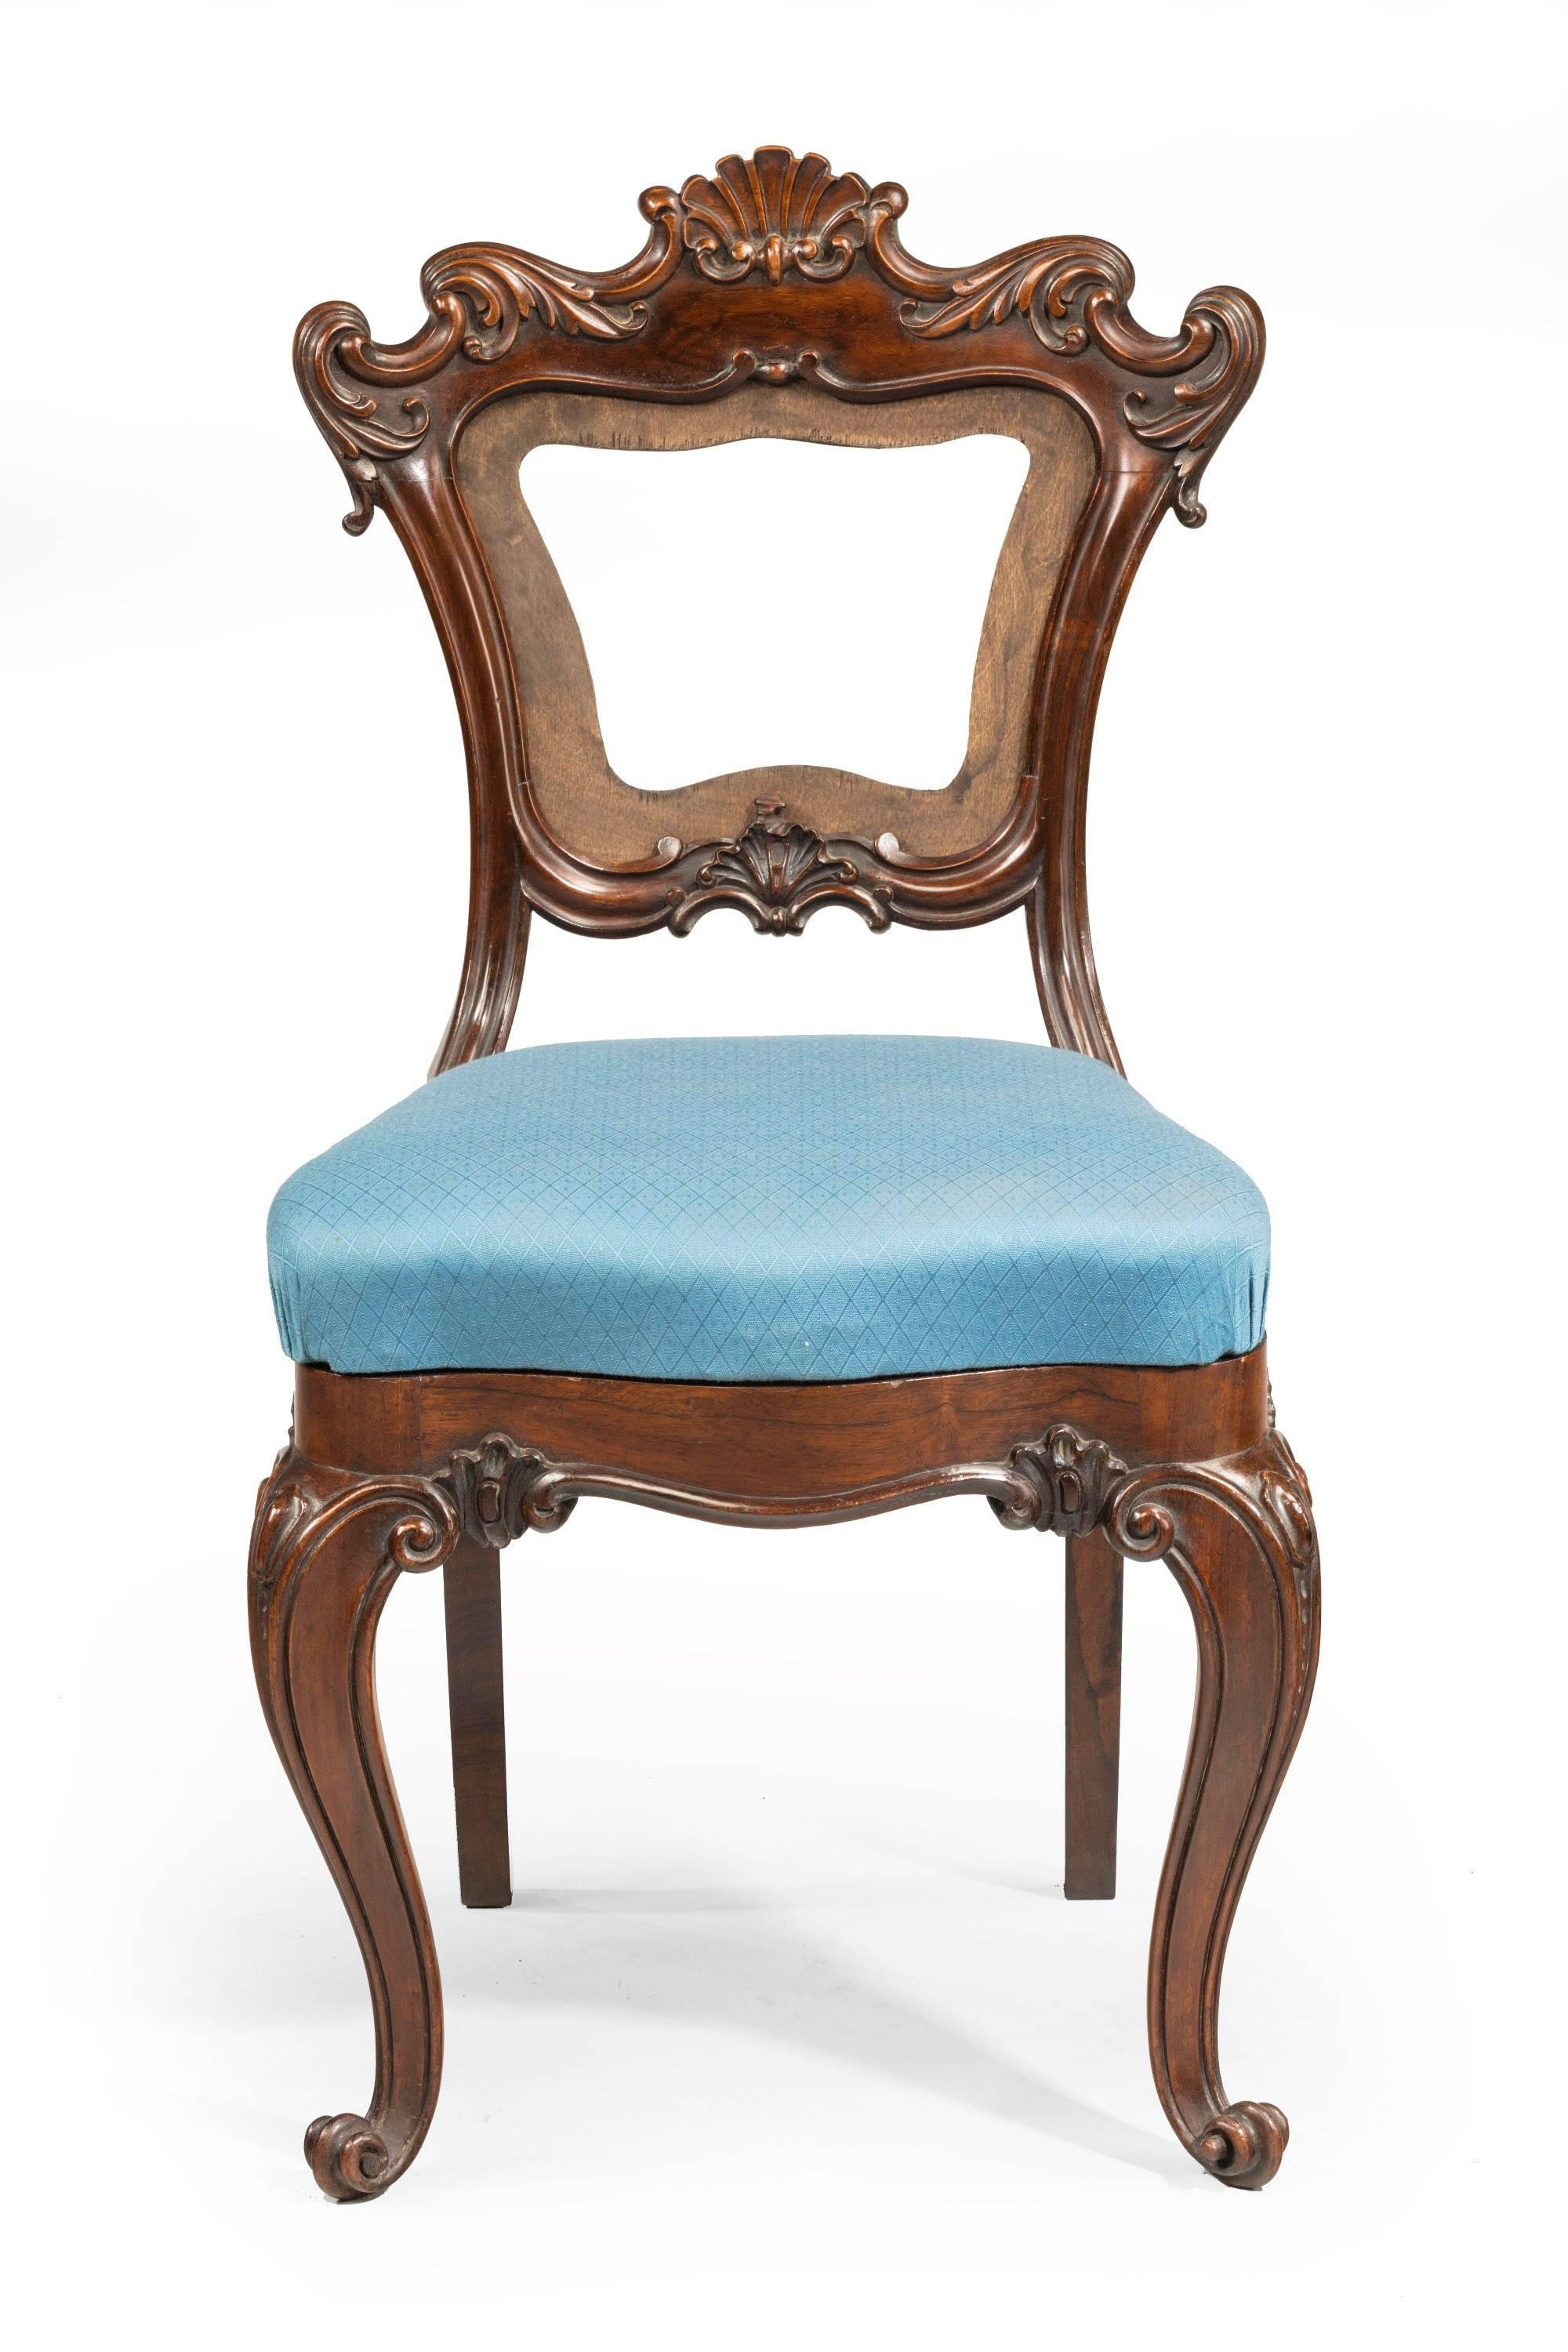 A set of early Victorian mahogany chairs of quite an elaborate form. On strong cabriole supports with wavy serpentine seats. The backs originally upholstered now need recovering.